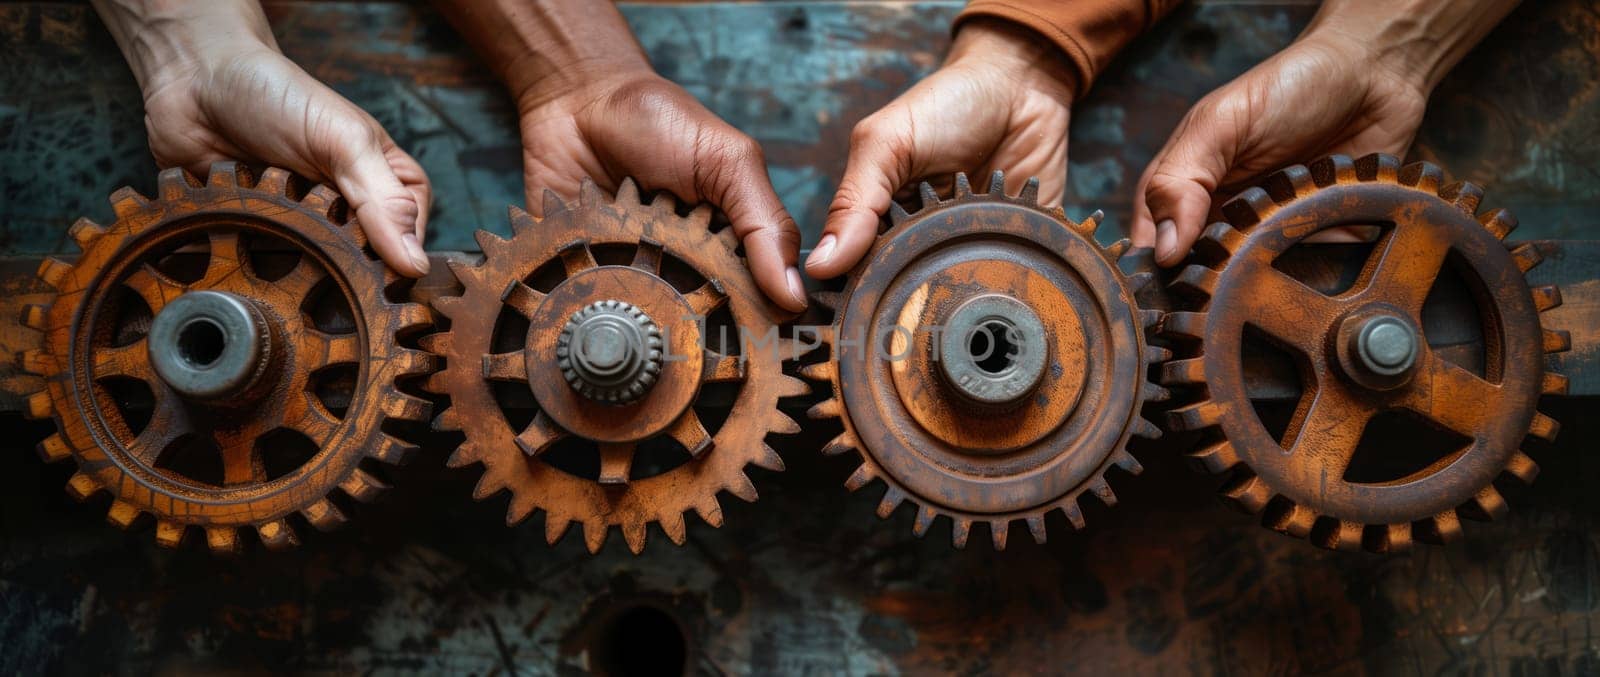 Person holding a row of rusty gears, automotive wheel system parts by richwolf